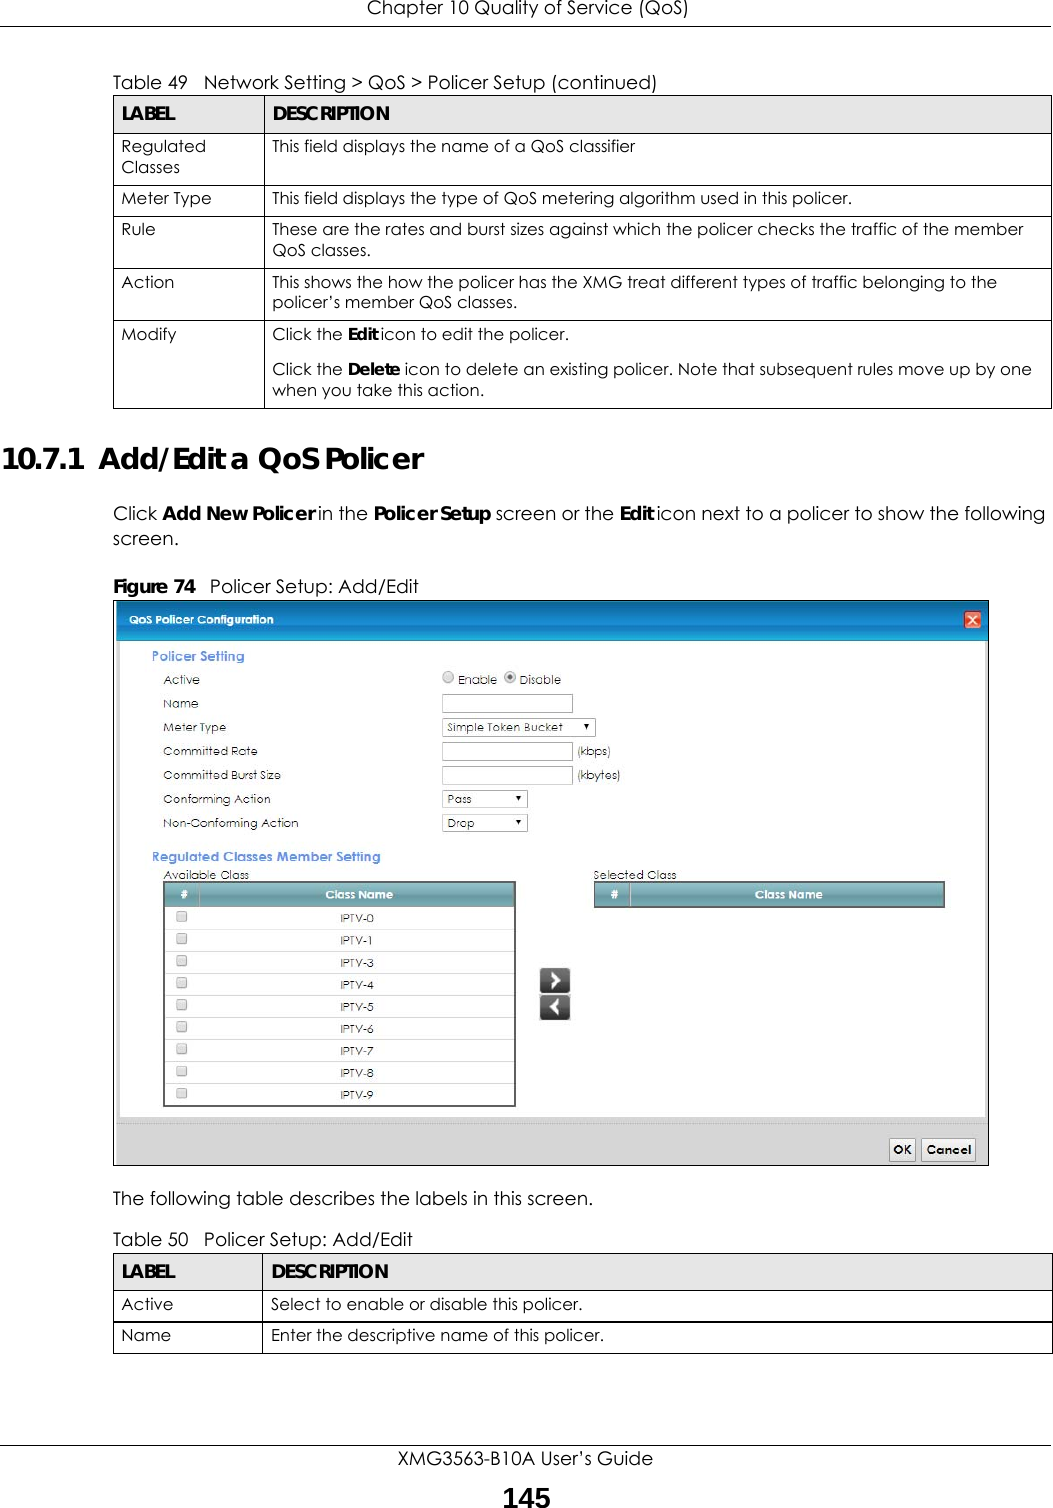  Chapter 10 Quality of Service (QoS)XMG3563-B10A User’s Guide14510.7.1  Add/Edit a QoS Policer Click Add New Policer in the Policer Setup screen or the Edit icon next to a policer to show the following screen. Figure 74   Policer Setup: Add/Edit The following table describes the labels in this screen. Regulated ClassesThis field displays the name of a QoS classifierMeter Type This field displays the type of QoS metering algorithm used in this policer.Rule These are the rates and burst sizes against which the policer checks the traffic of the member QoS classes.Action This shows the how the policer has the XMG treat different types of traffic belonging to the policer’s member QoS classes.Modify Click the Edit icon to edit the policer.Click the Delete icon to delete an existing policer. Note that subsequent rules move up by one when you take this action.Table 49   Network Setting &gt; QoS &gt; Policer Setup (continued)LABEL DESCRIPTIONTable 50   Policer Setup: Add/EditLABEL DESCRIPTIONActive Select to enable or disable this policer.Name Enter the descriptive name of this policer.